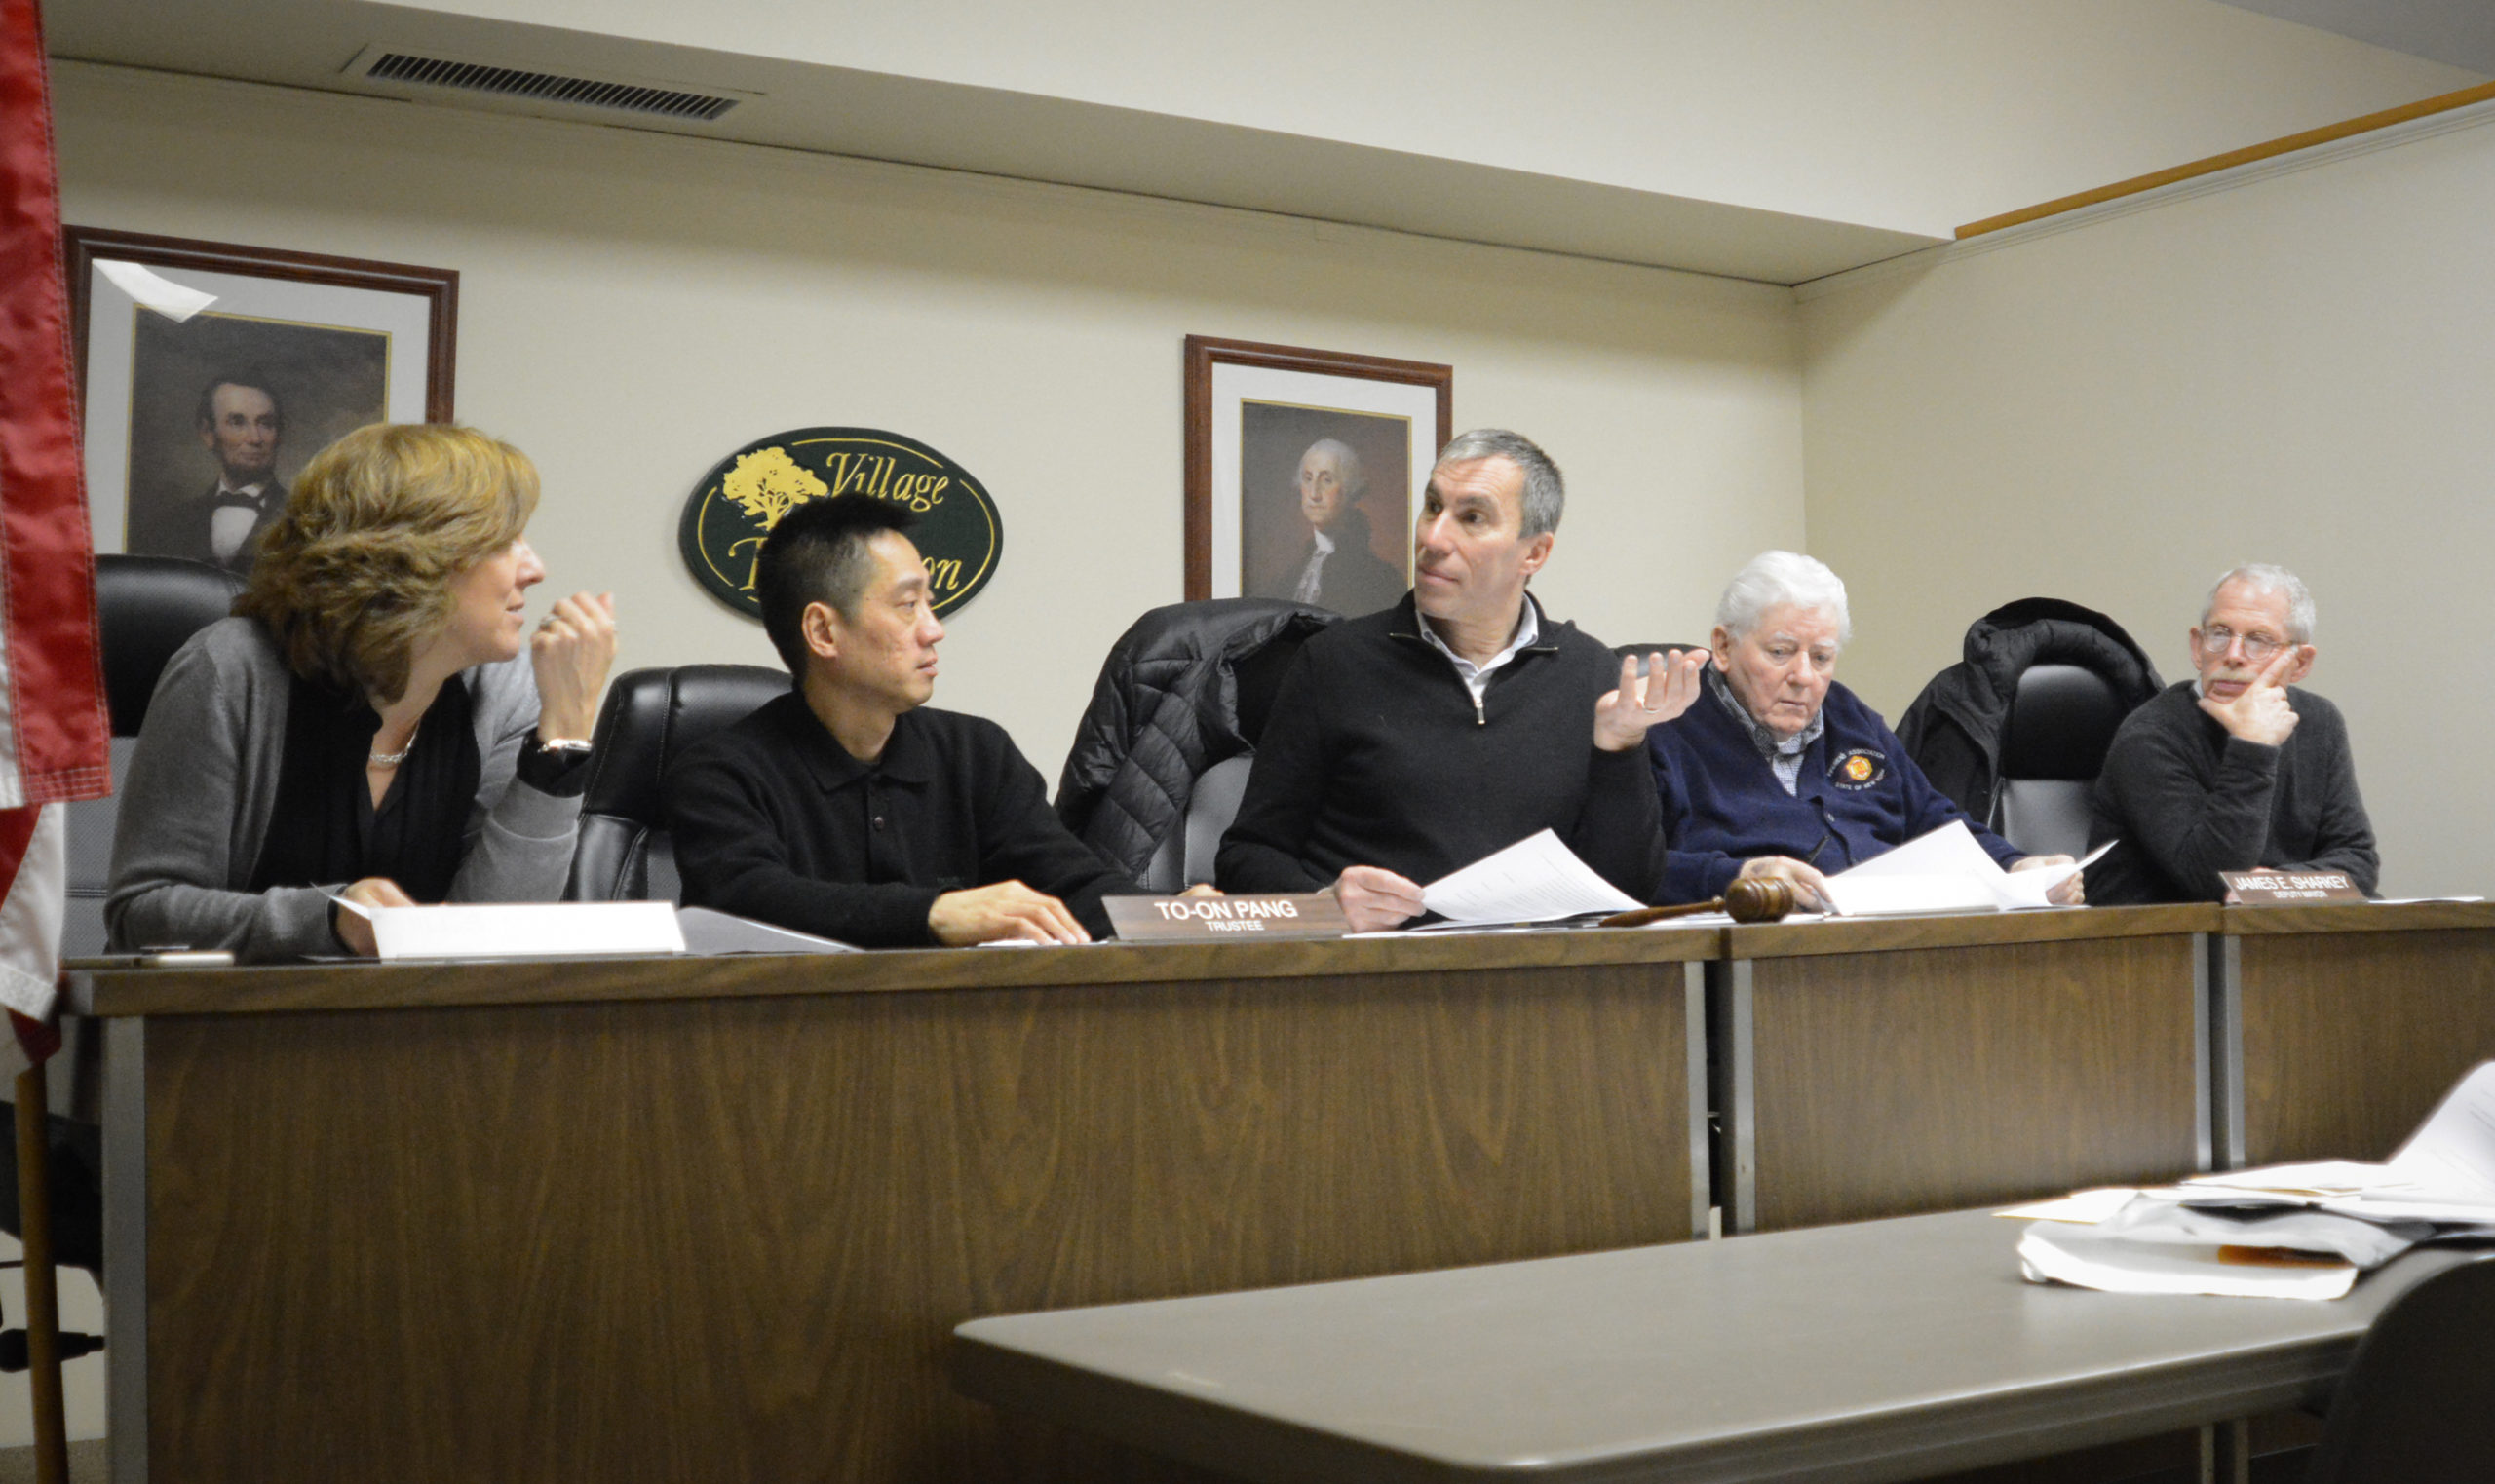 Thomaston trustees approved a budget last week and appointed a building official at a meeting on Tuesday. (Photo by Janelle Clausen)